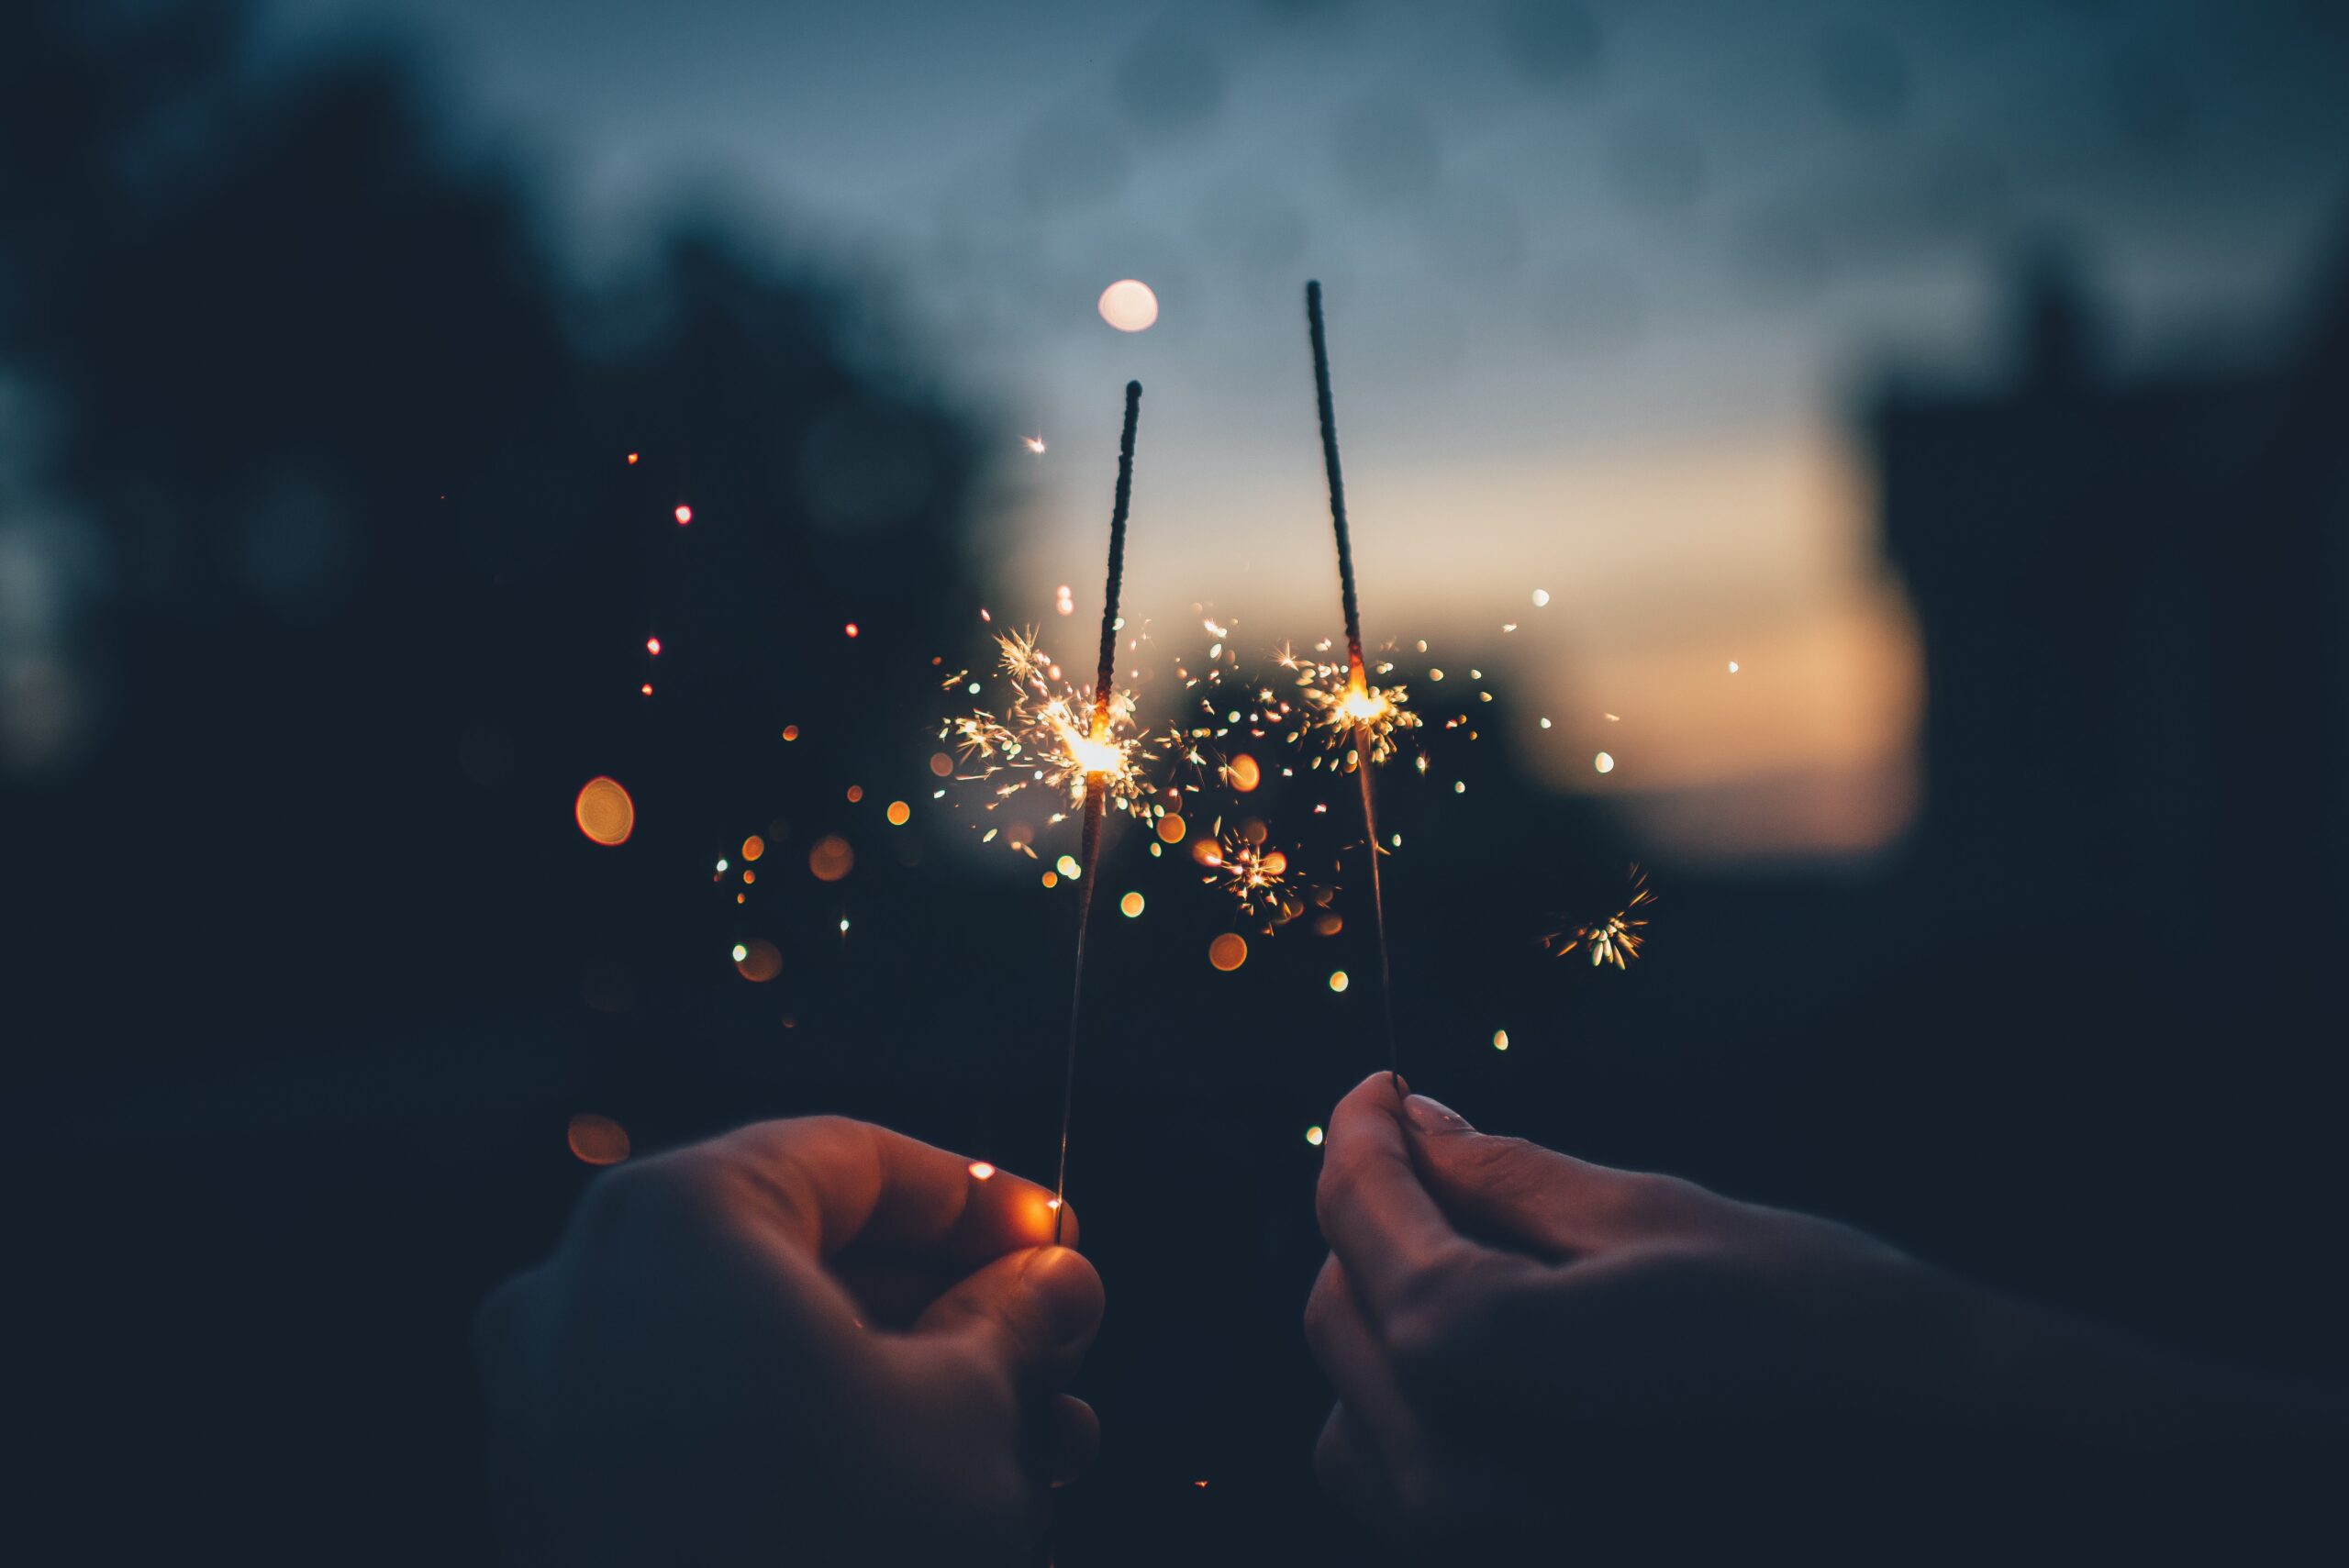 Dark photo of two hands holding sparklers with sunset in the background.